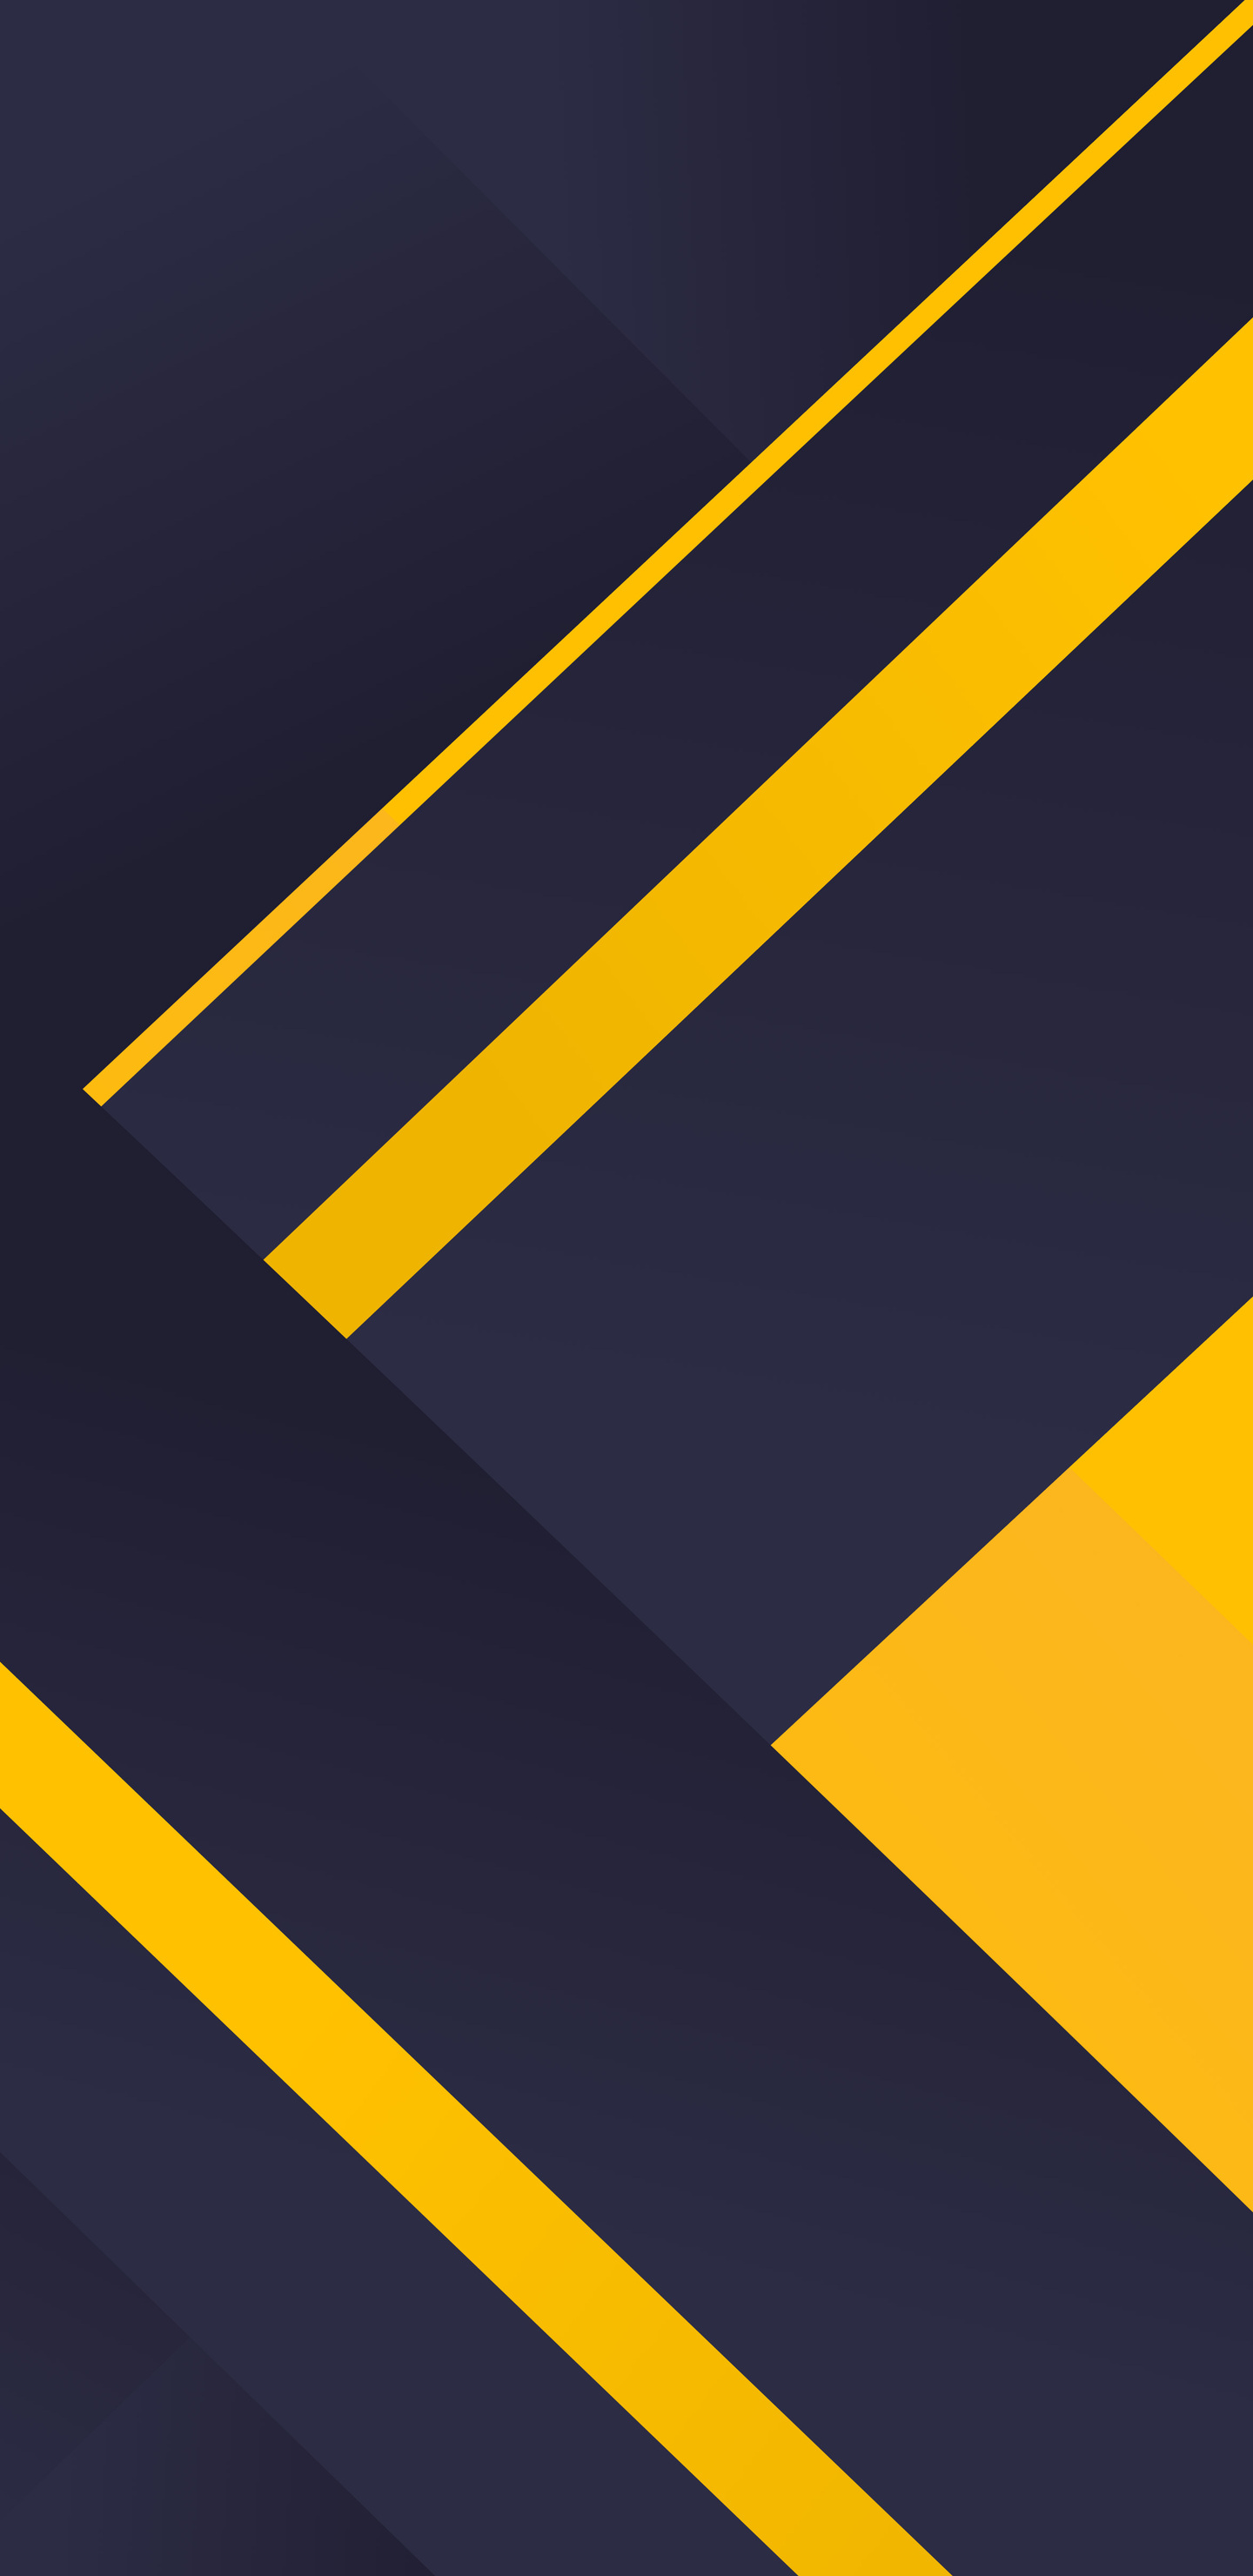 1440x2960 Geometric Material Yellow Blue 4k Samsung Galaxy Note 9,8,  S9,S8,S8+ QHD HD 4k Wallpapers, Images, Backgrounds, Photos and Pictures